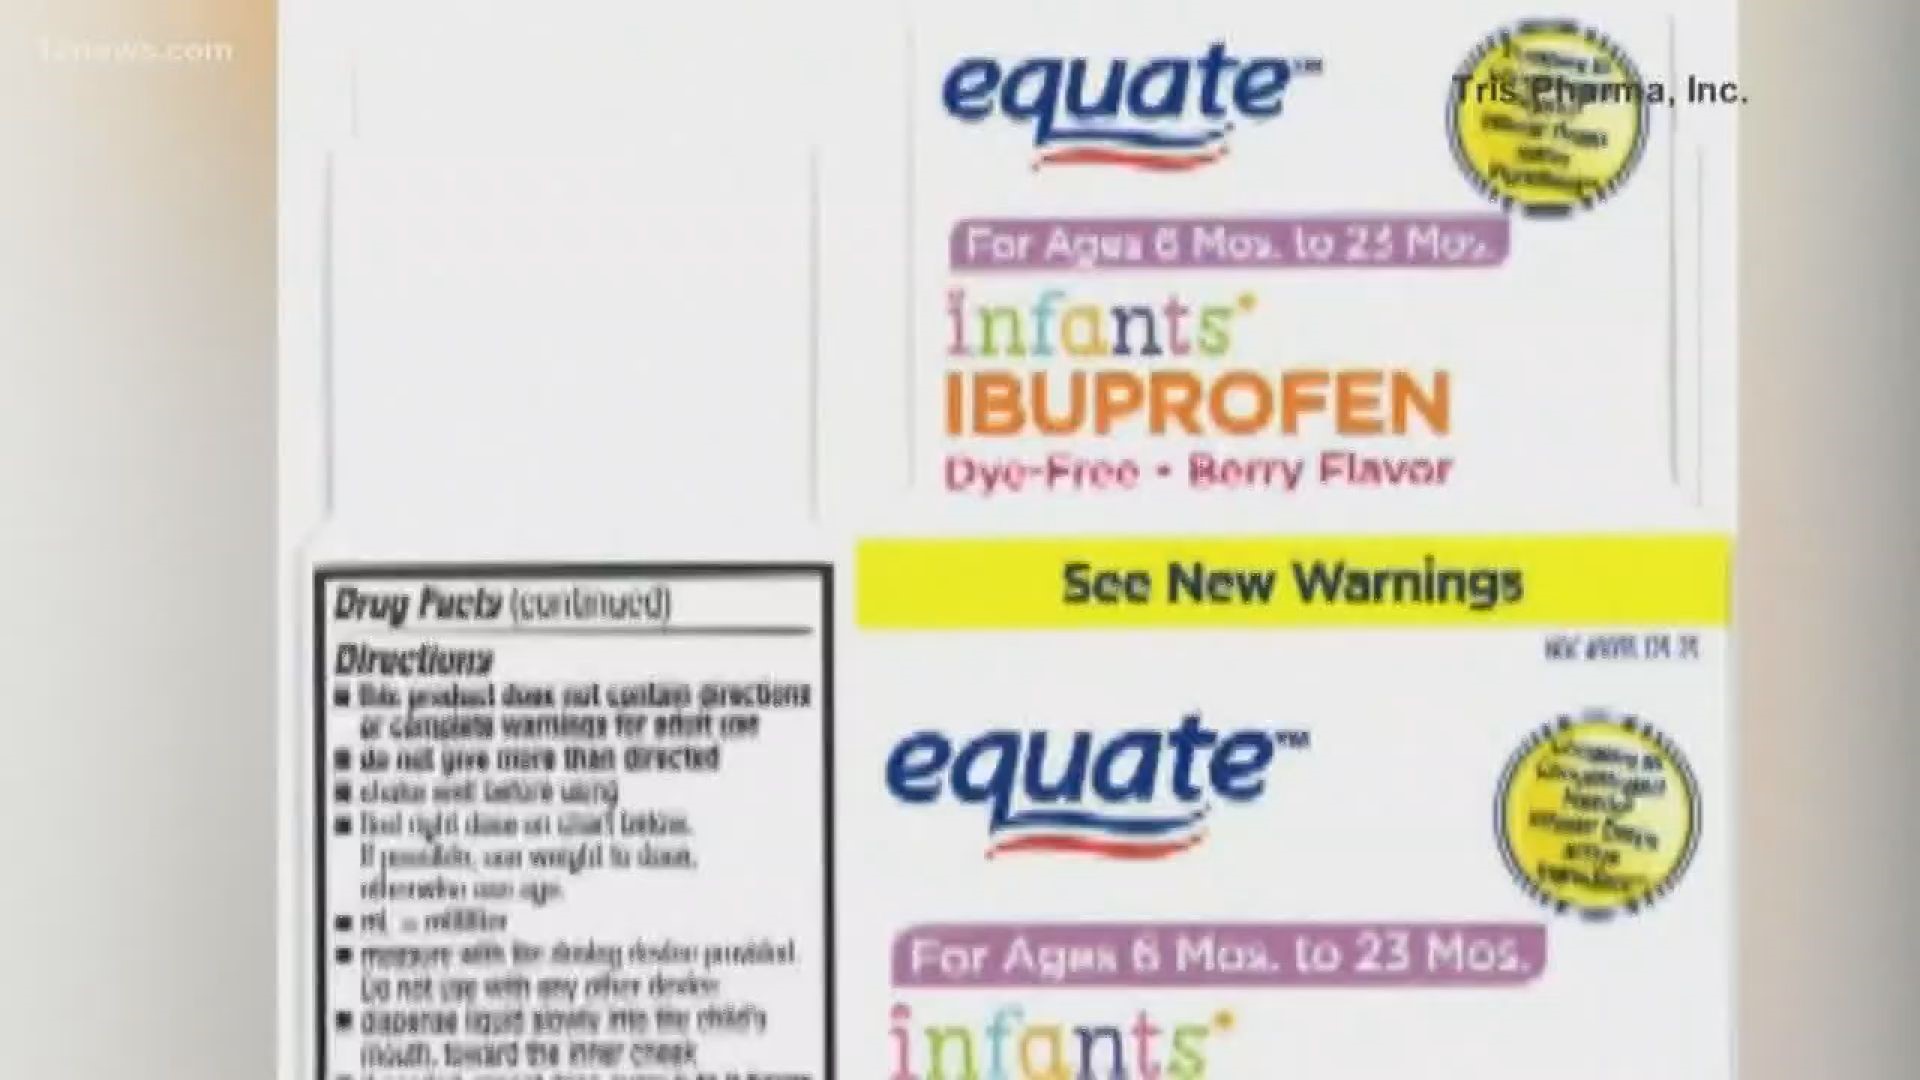 Too much ibuprofen for kids can be deadly, and the recalled products may contain high concentrations of ibuprofen. The recalled products were sold at CVS, Family Dollar and Walmart.